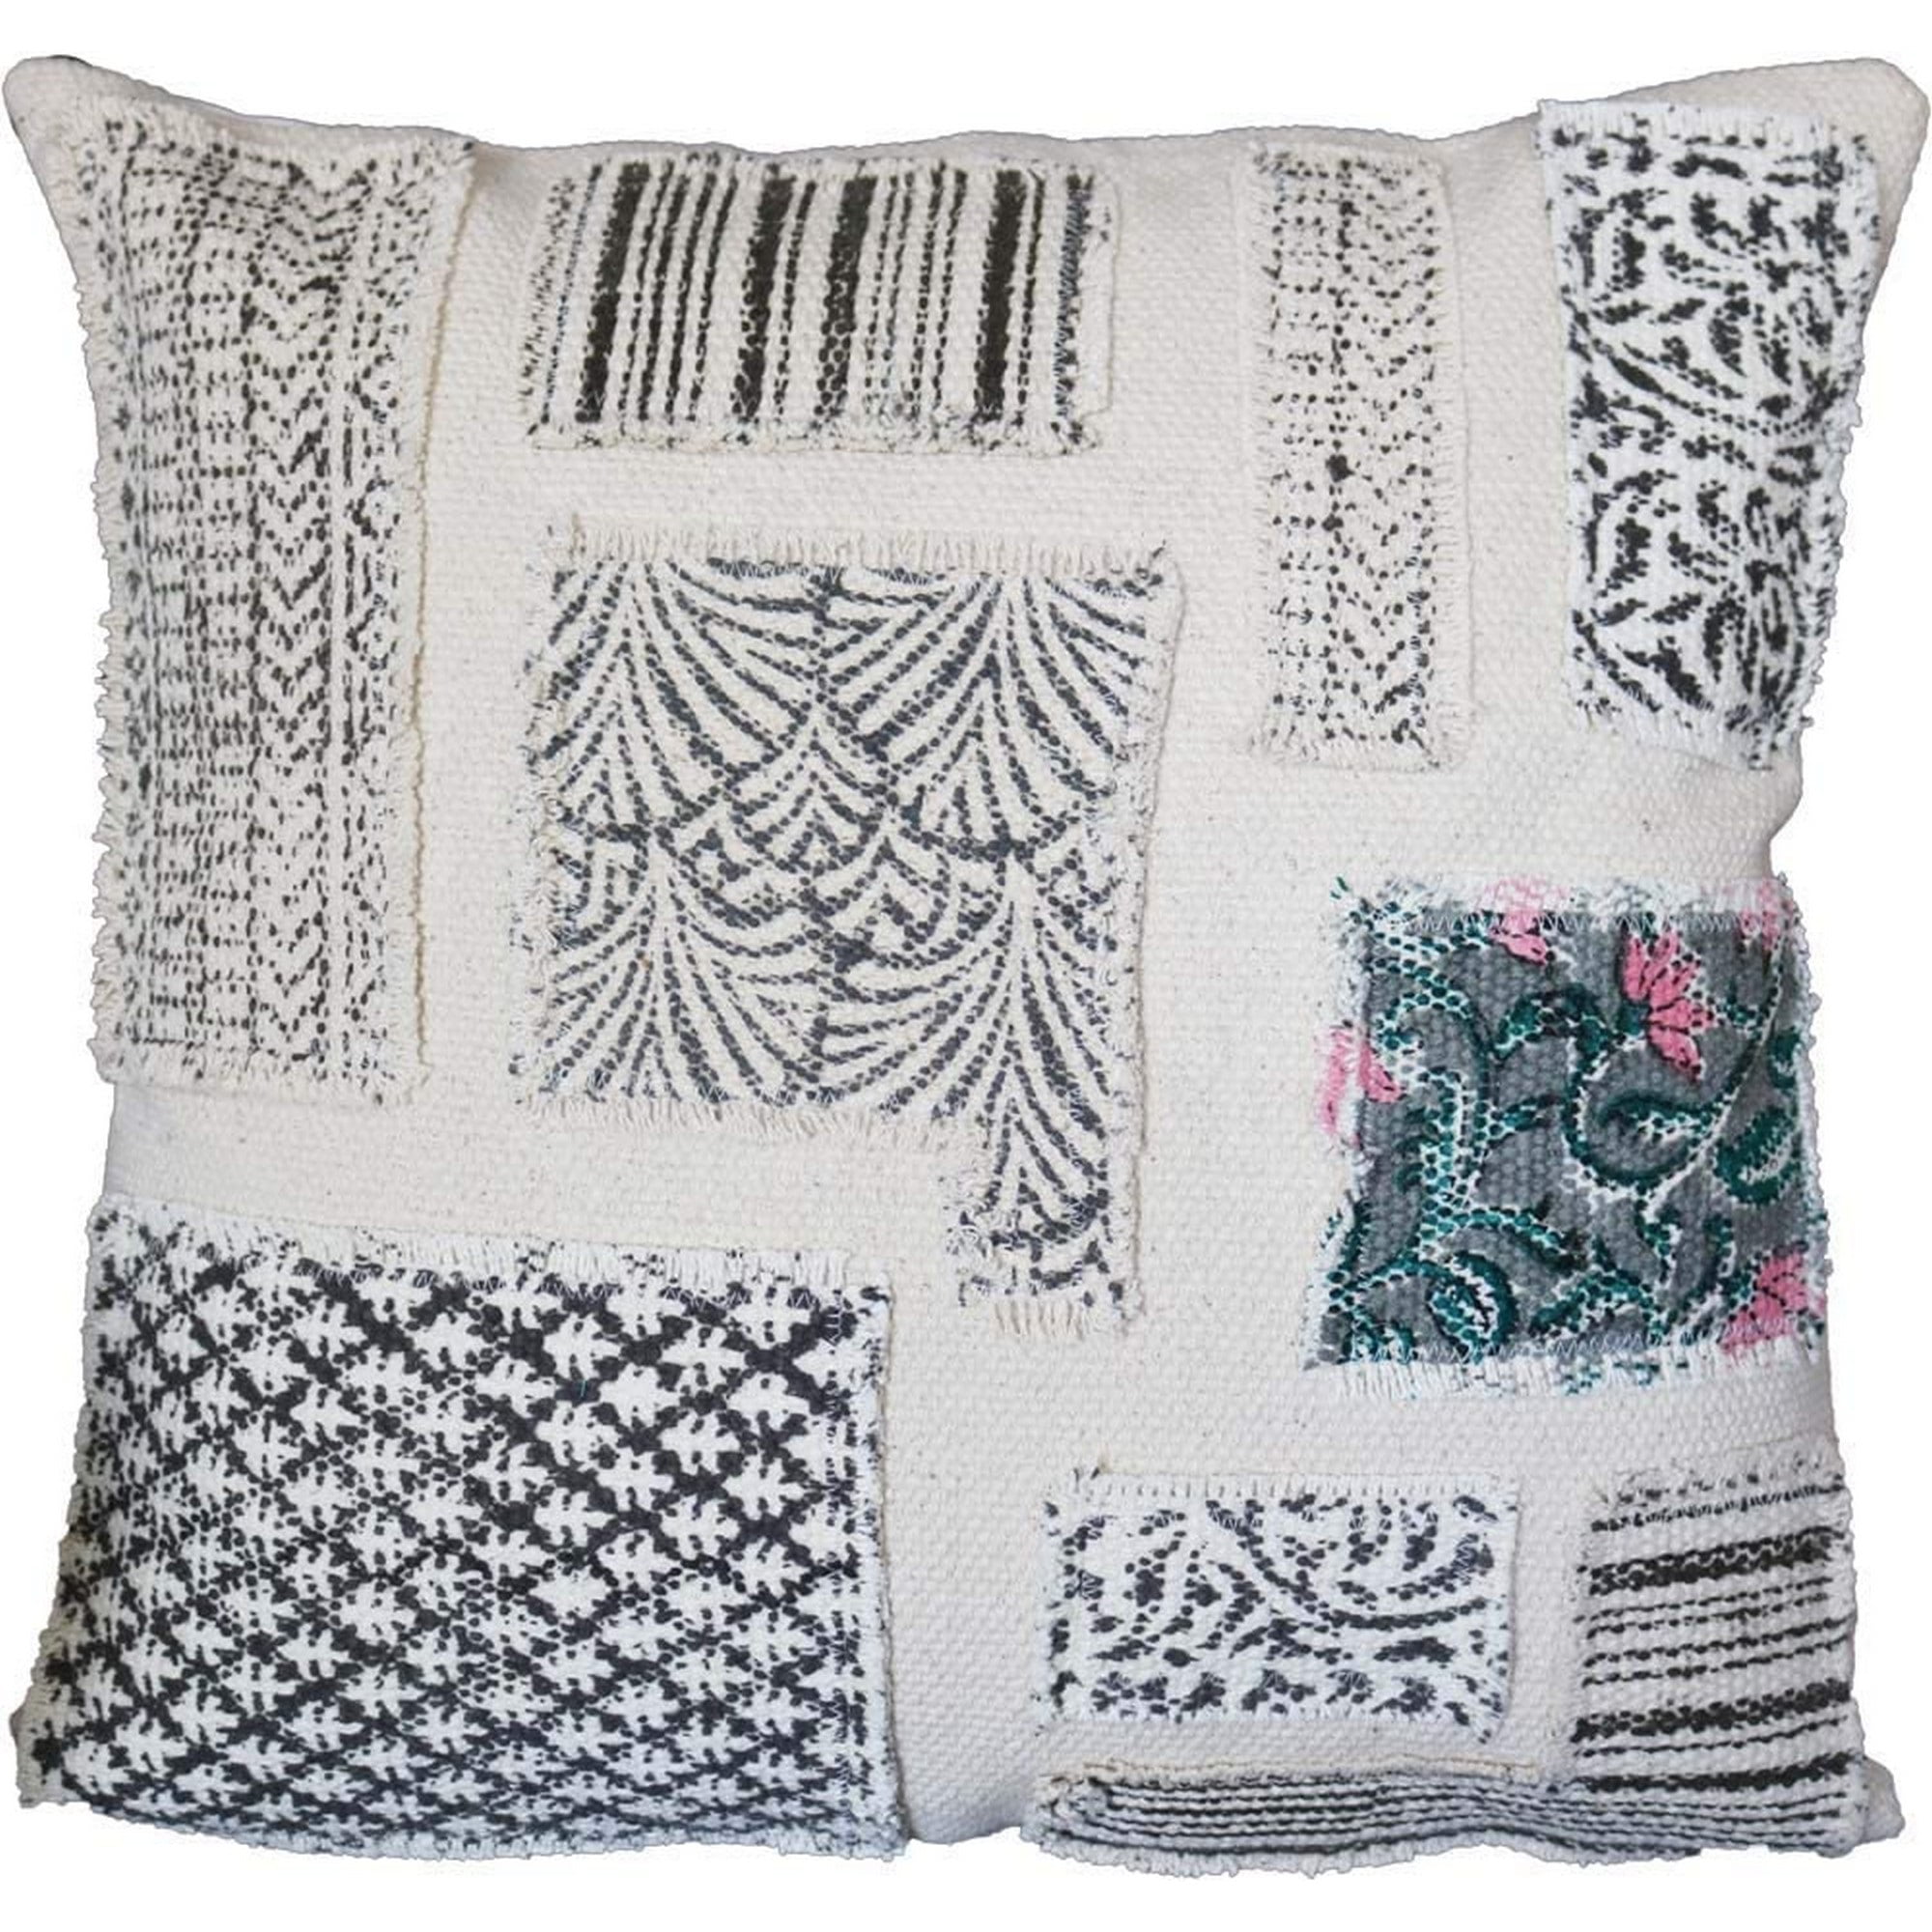 Benjara 36 x 14 Cotton Accent Pillow with Trimmed Fringe Details Gray and Cream Set of 4 